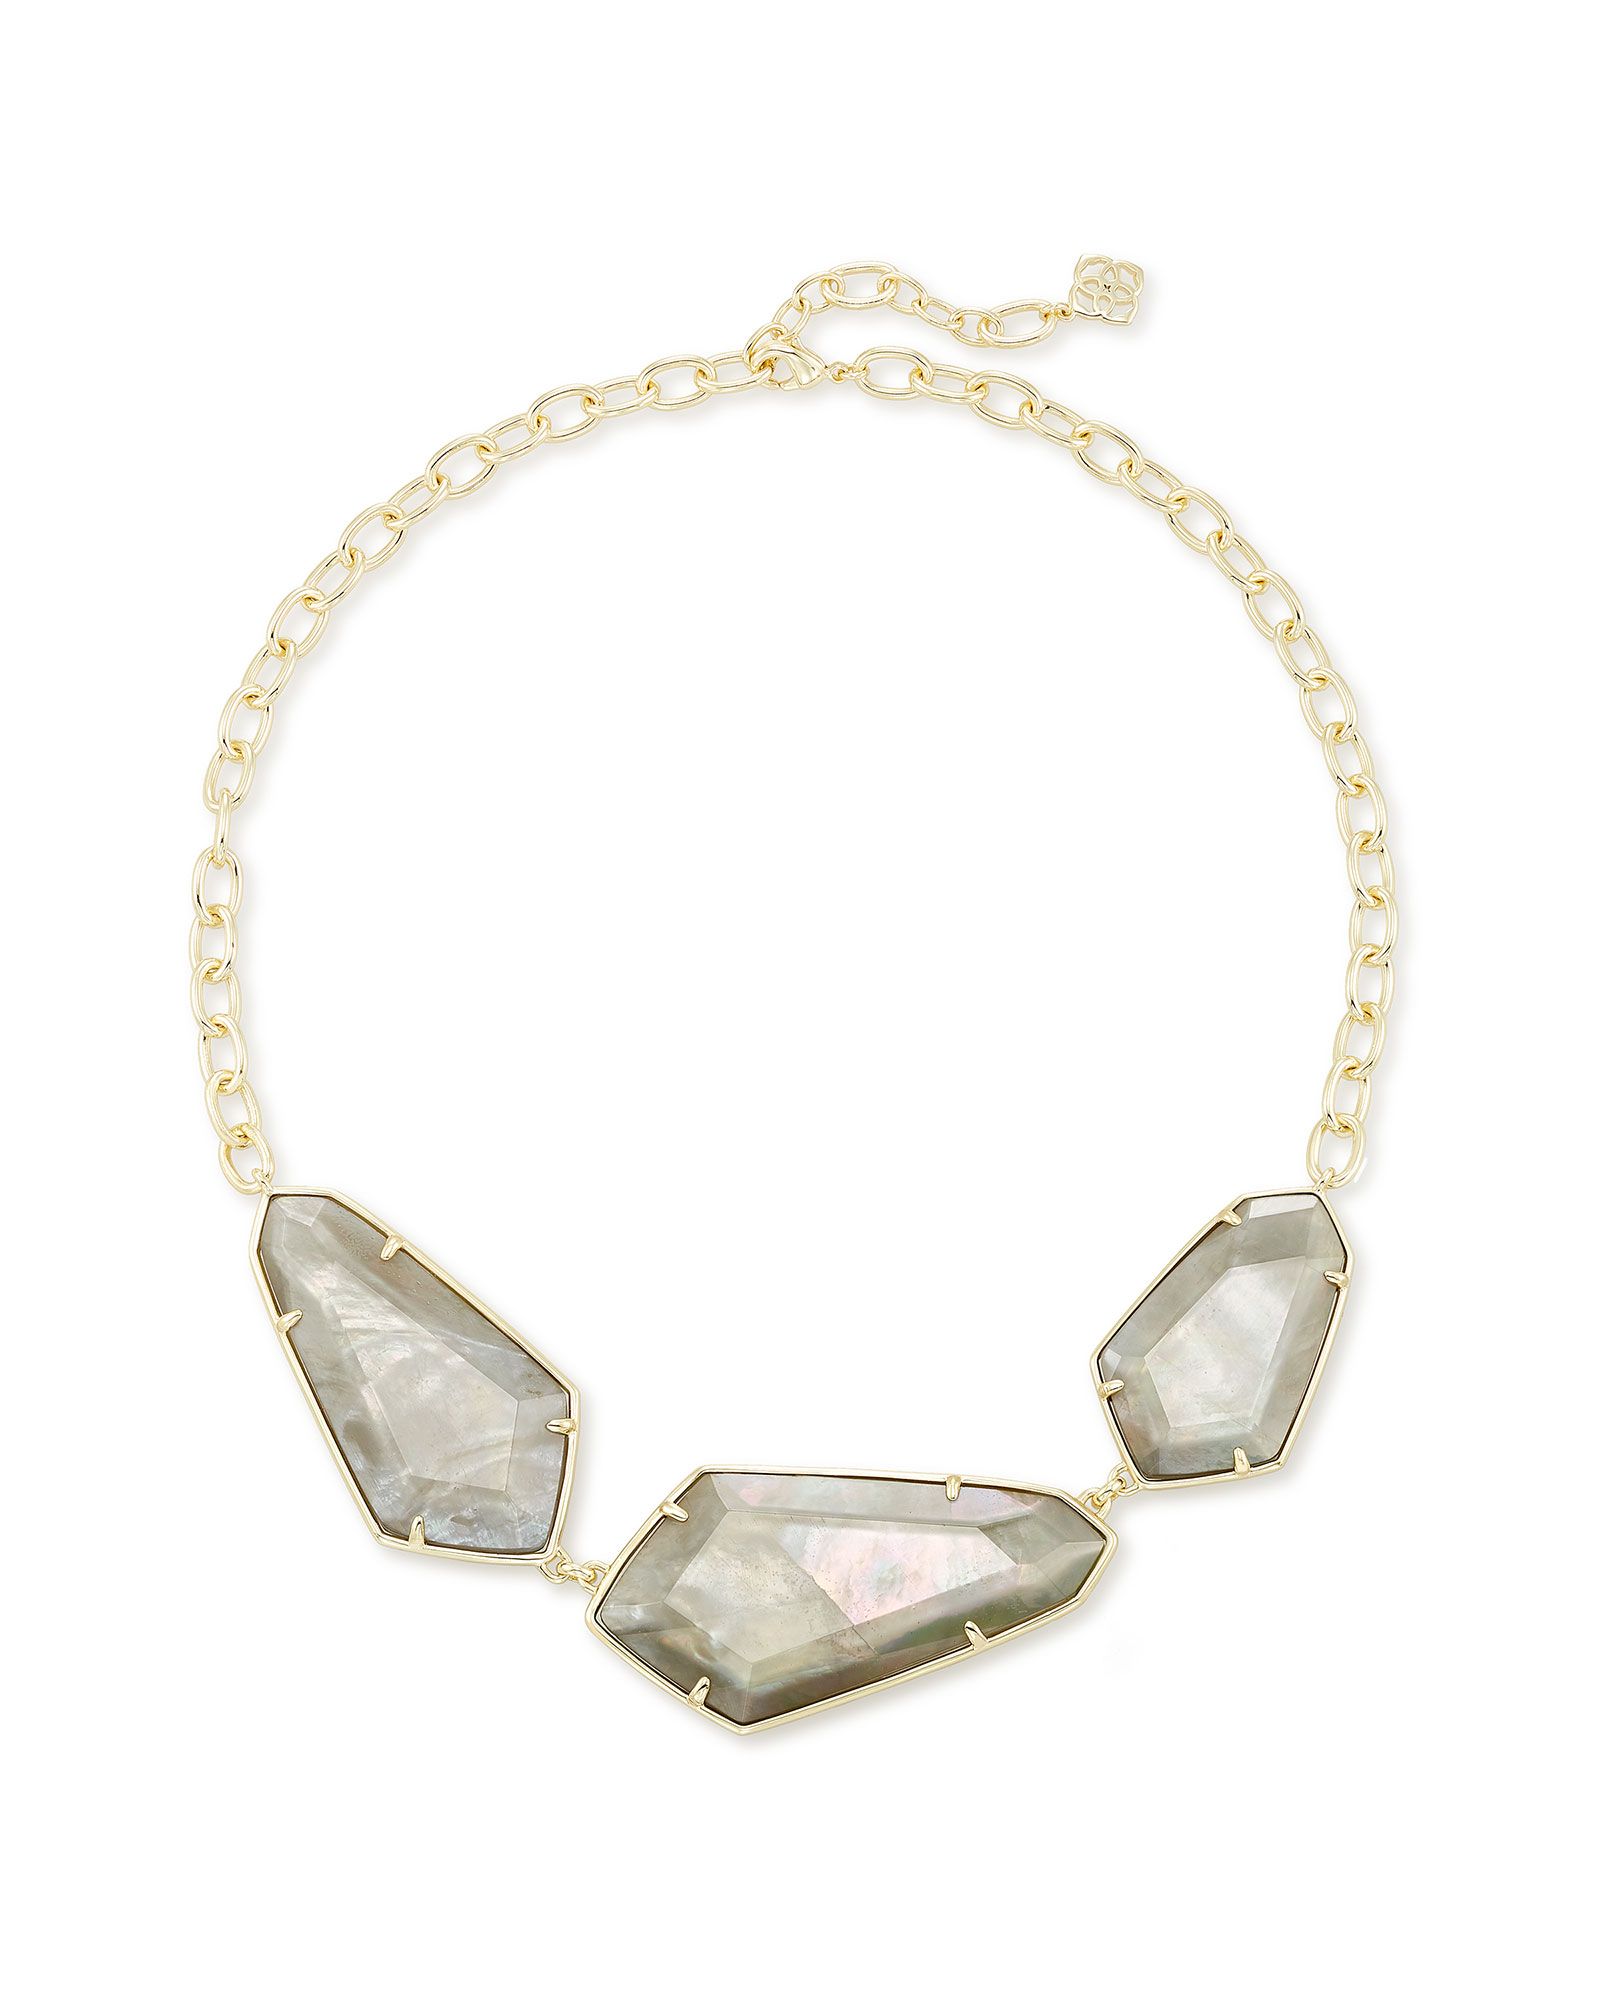 Violet Gold Statement Necklace in Gray Illusion | Kendra Scott